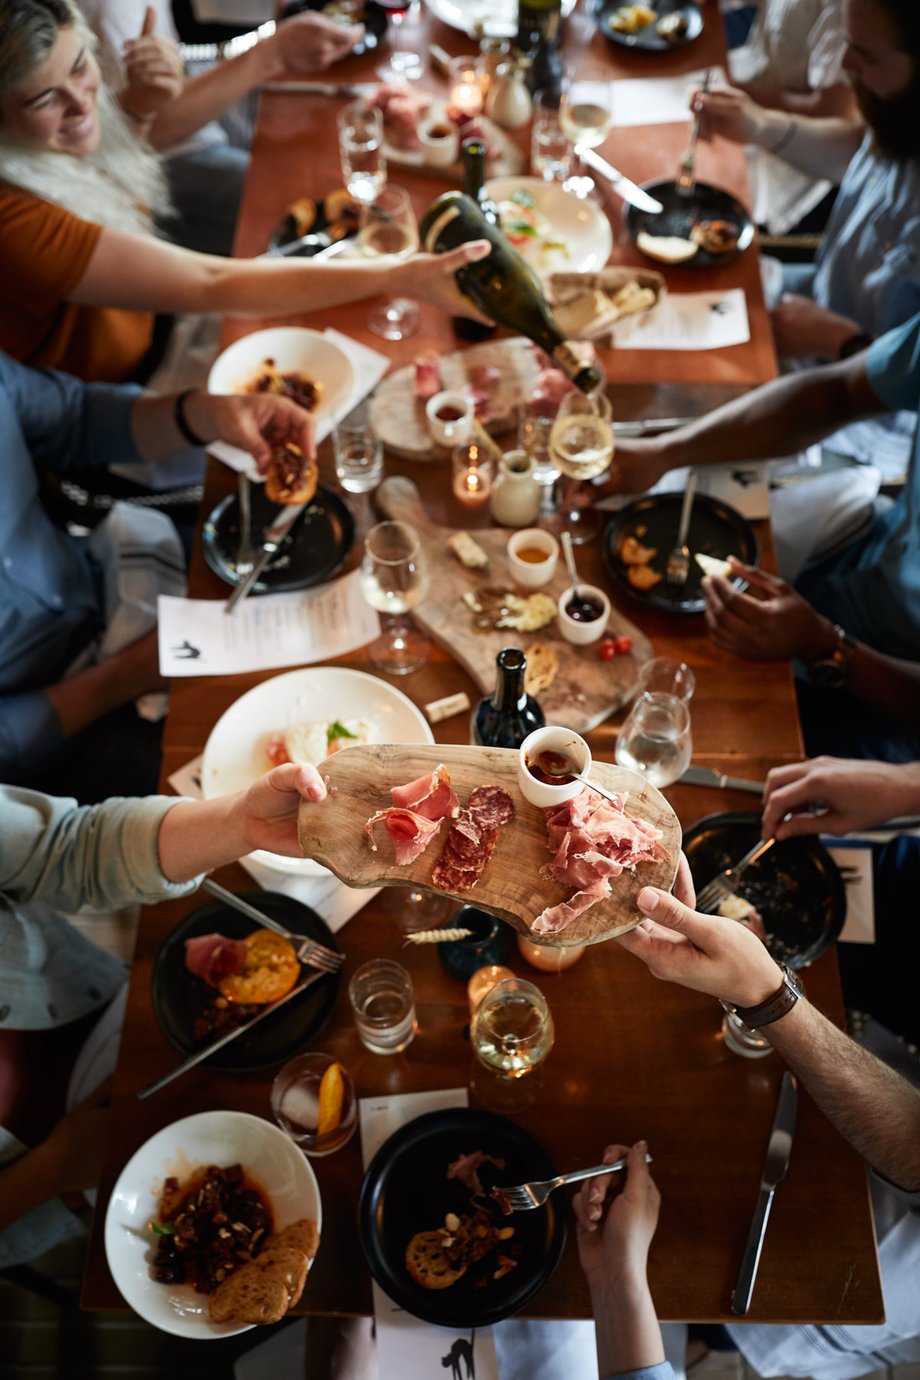 Jody Horton catches the festivities from above: a table full of food, wine, and people